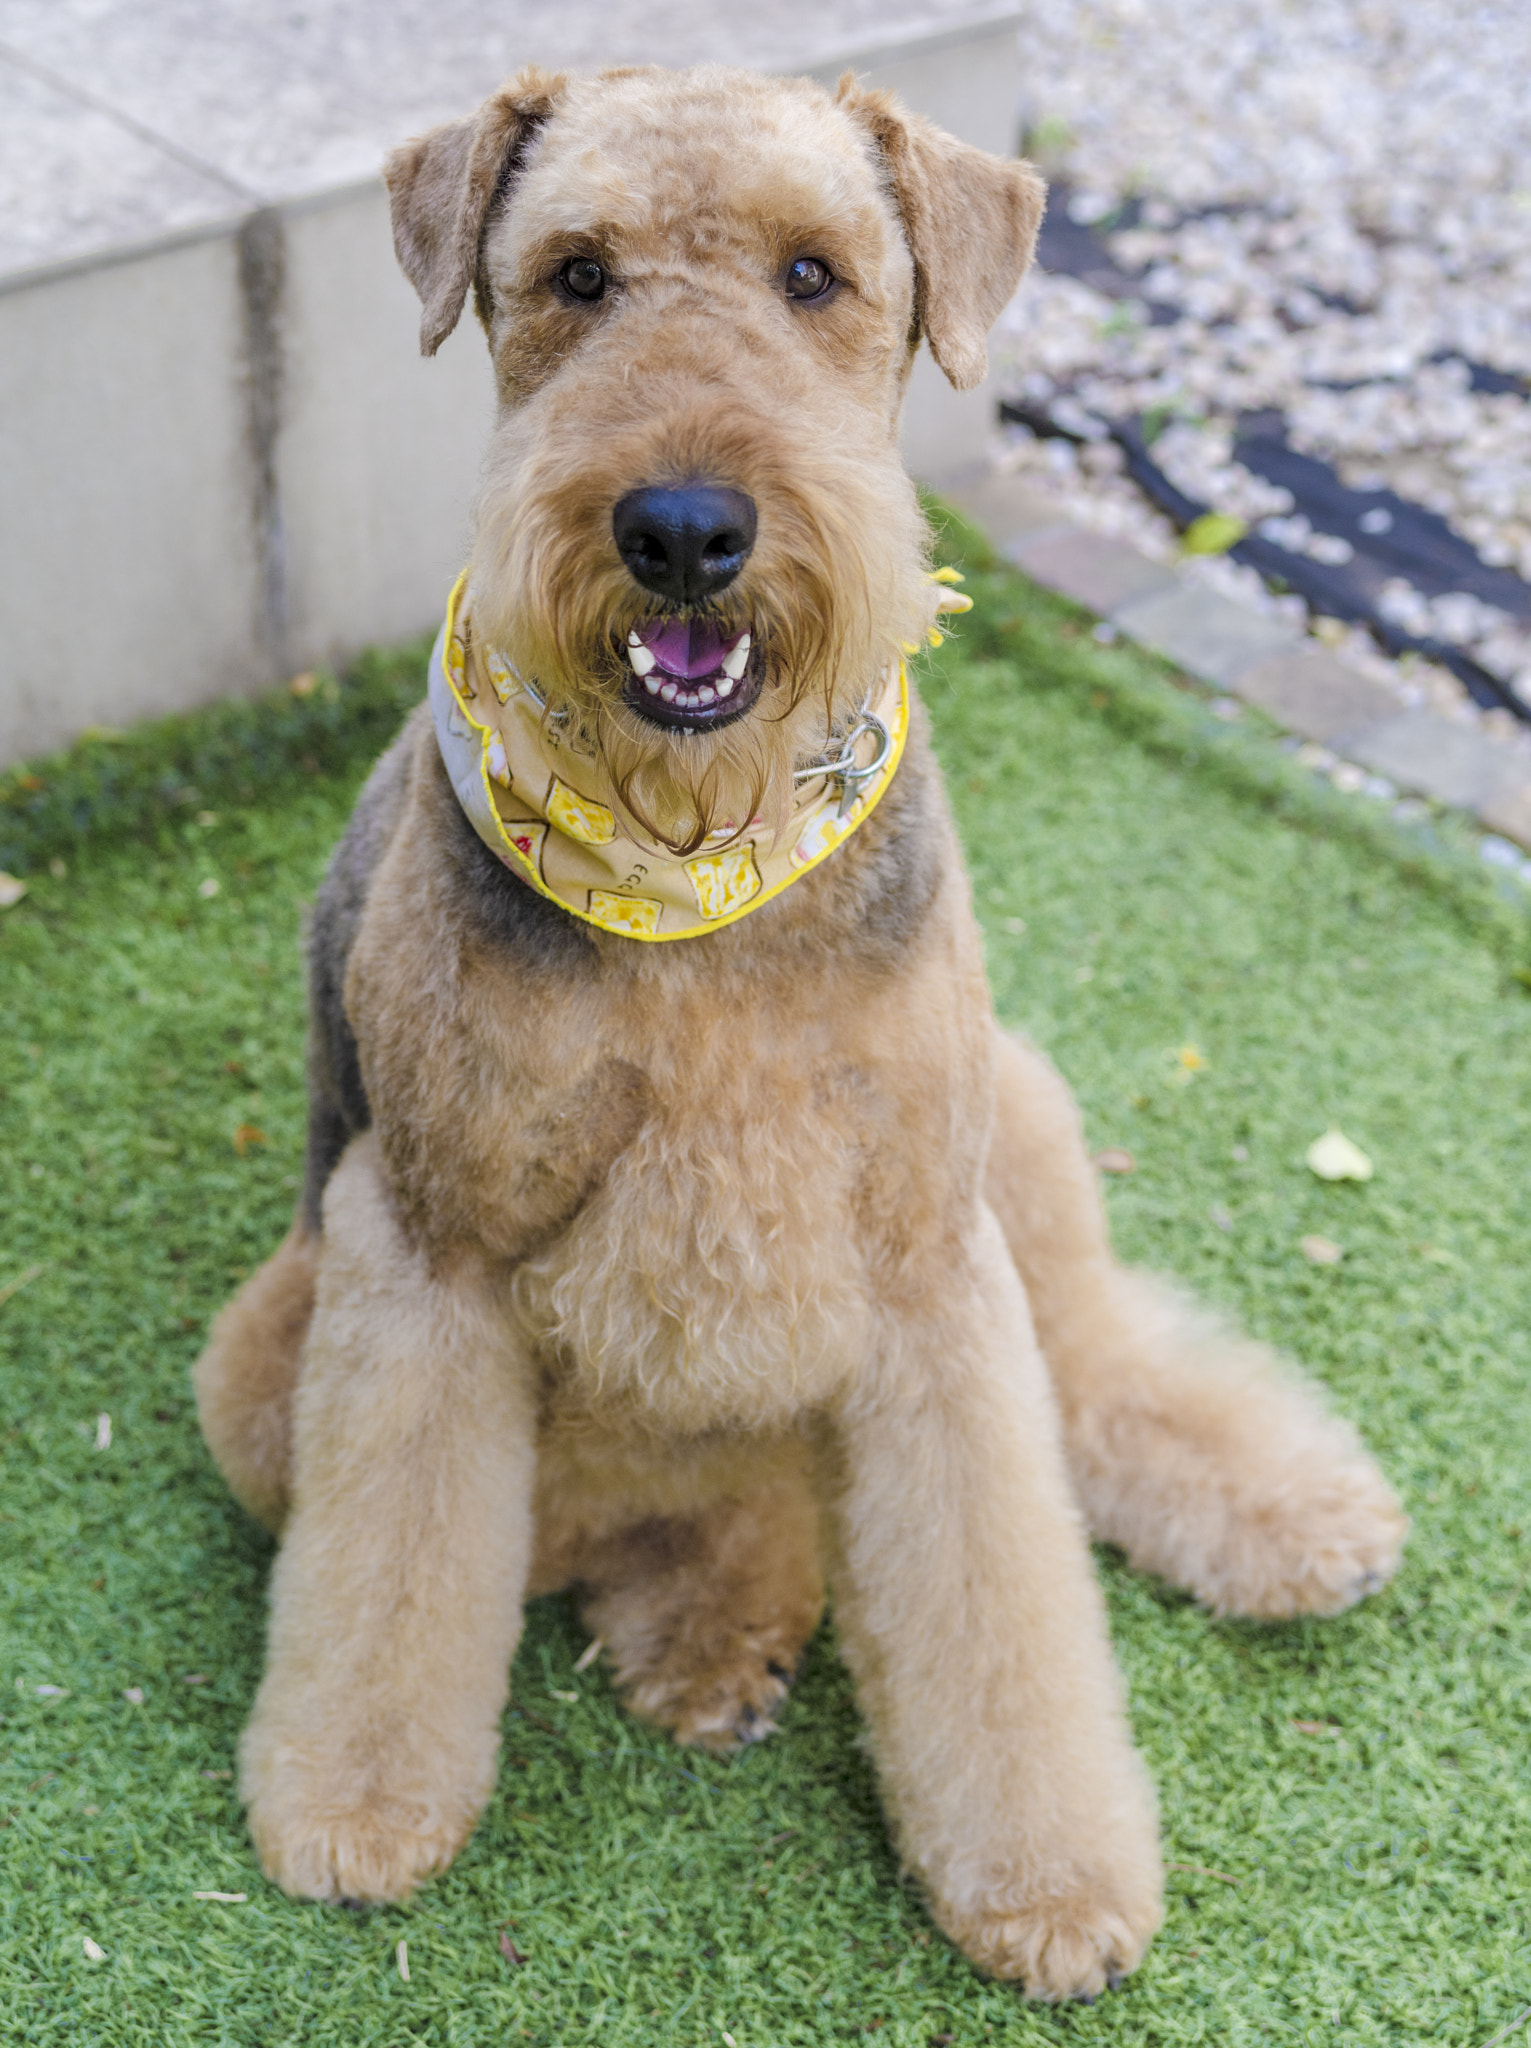 Pentax 645D sample photo. He was trimmed today to be a handsome boy photography